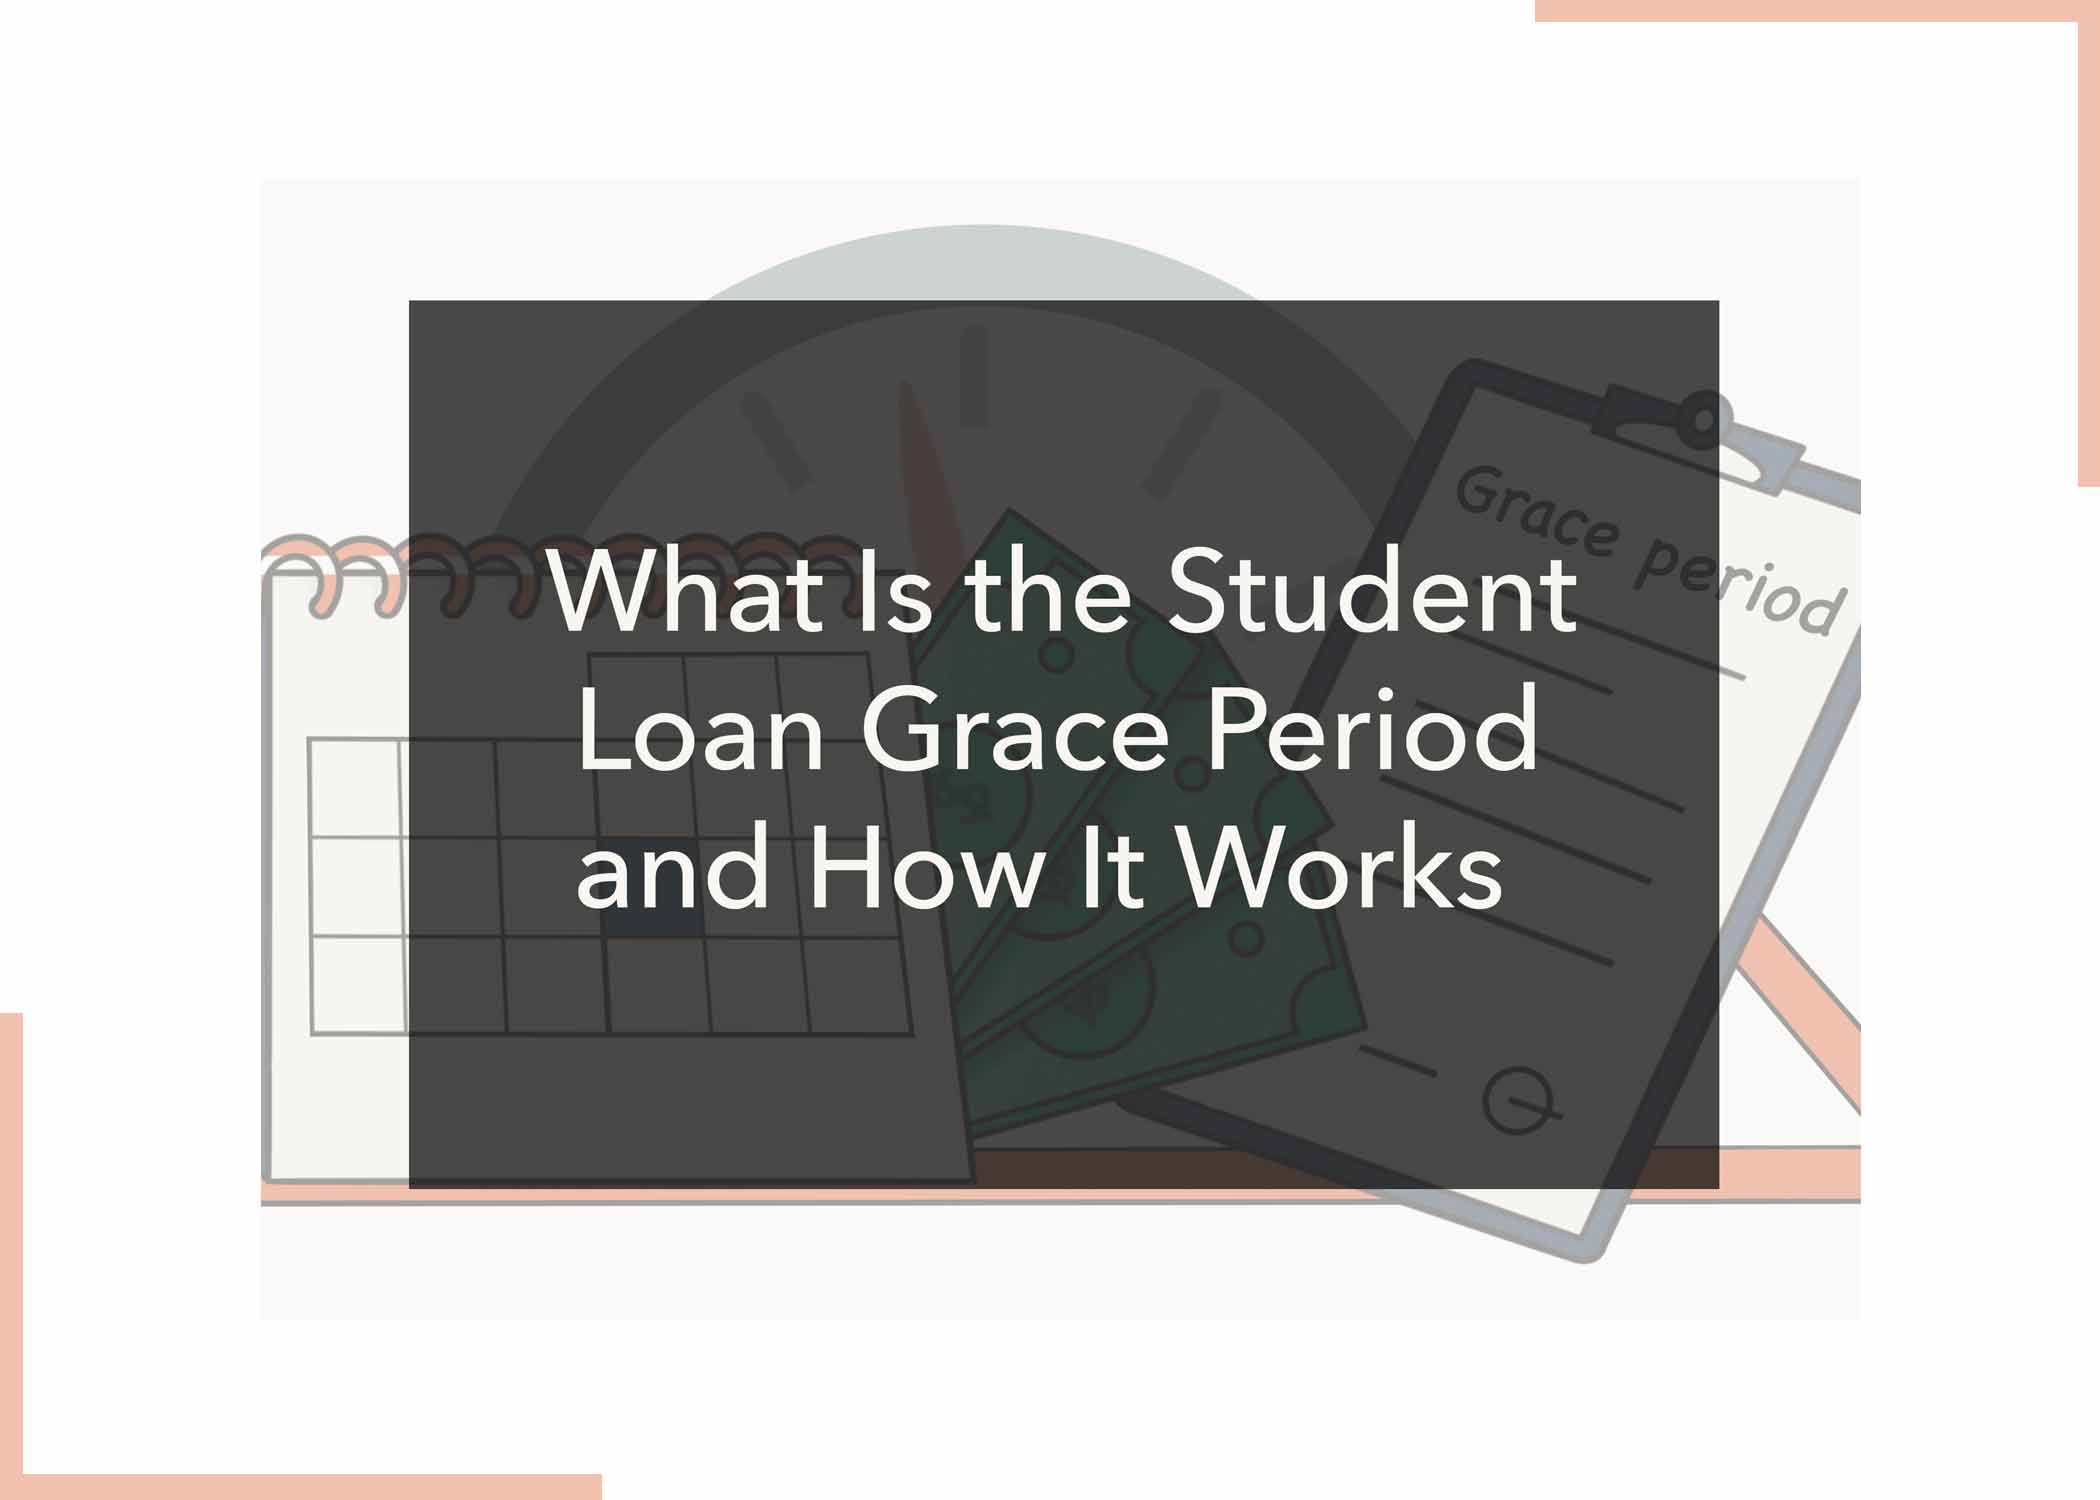 What Is the Student Loan Grace Period and How It Works